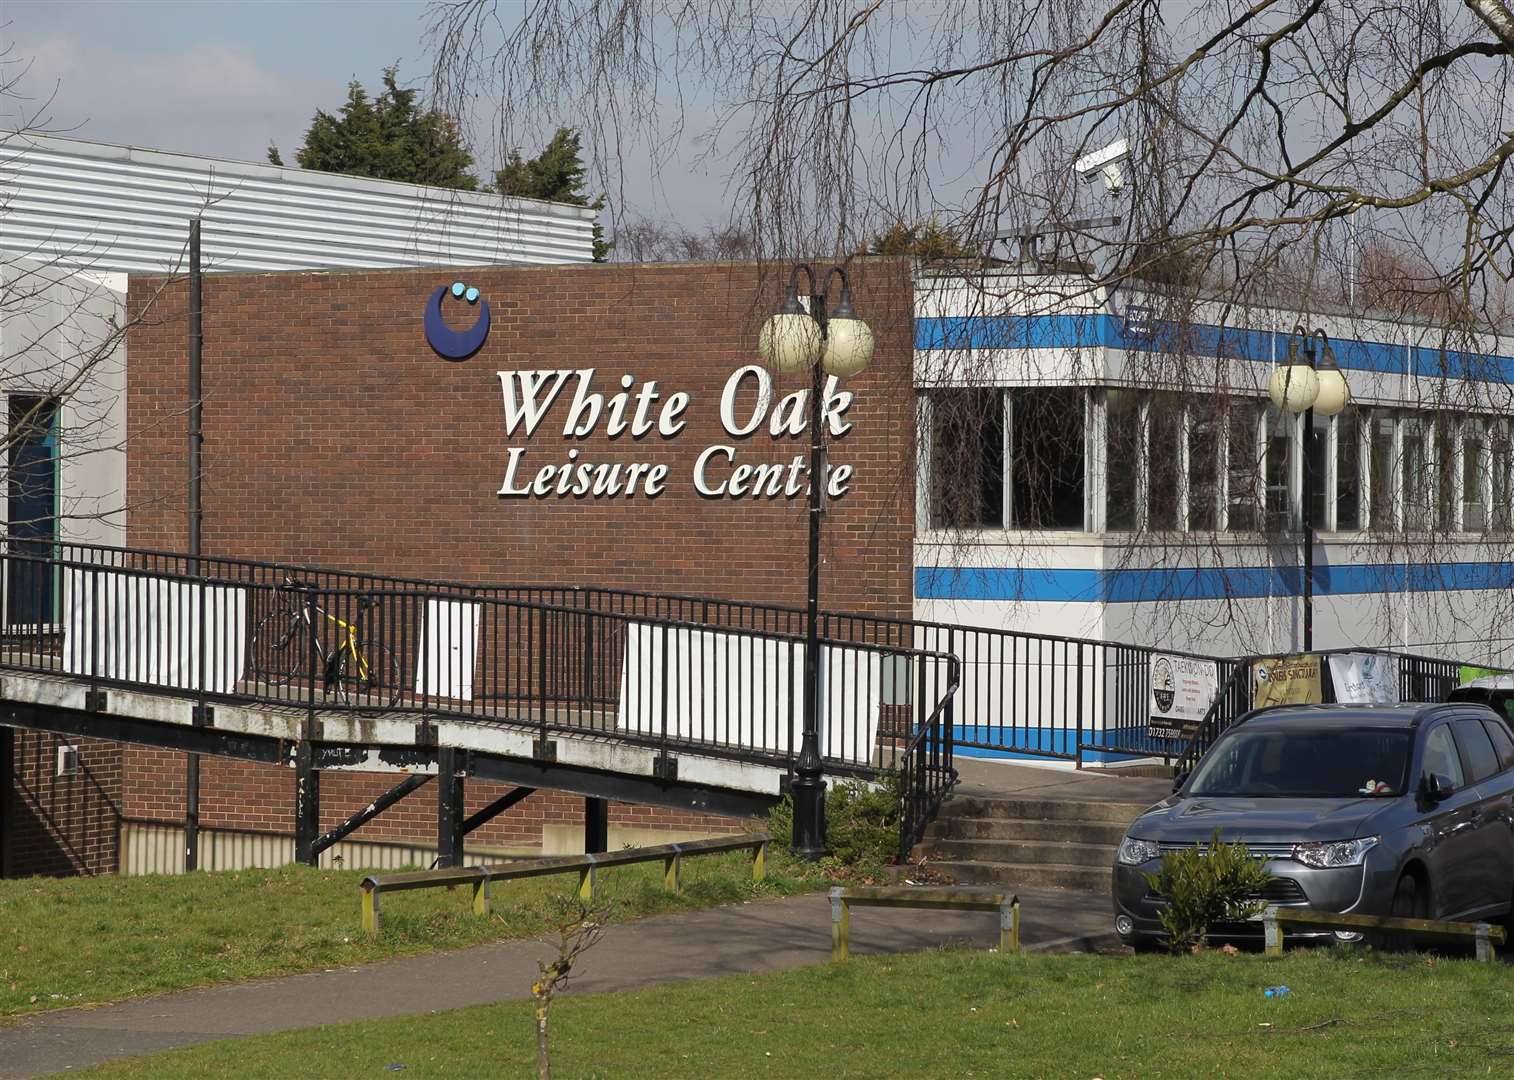 The existing White Oak Leisure Centre will reopen next month before it is demolished. Picture: John Westhrop